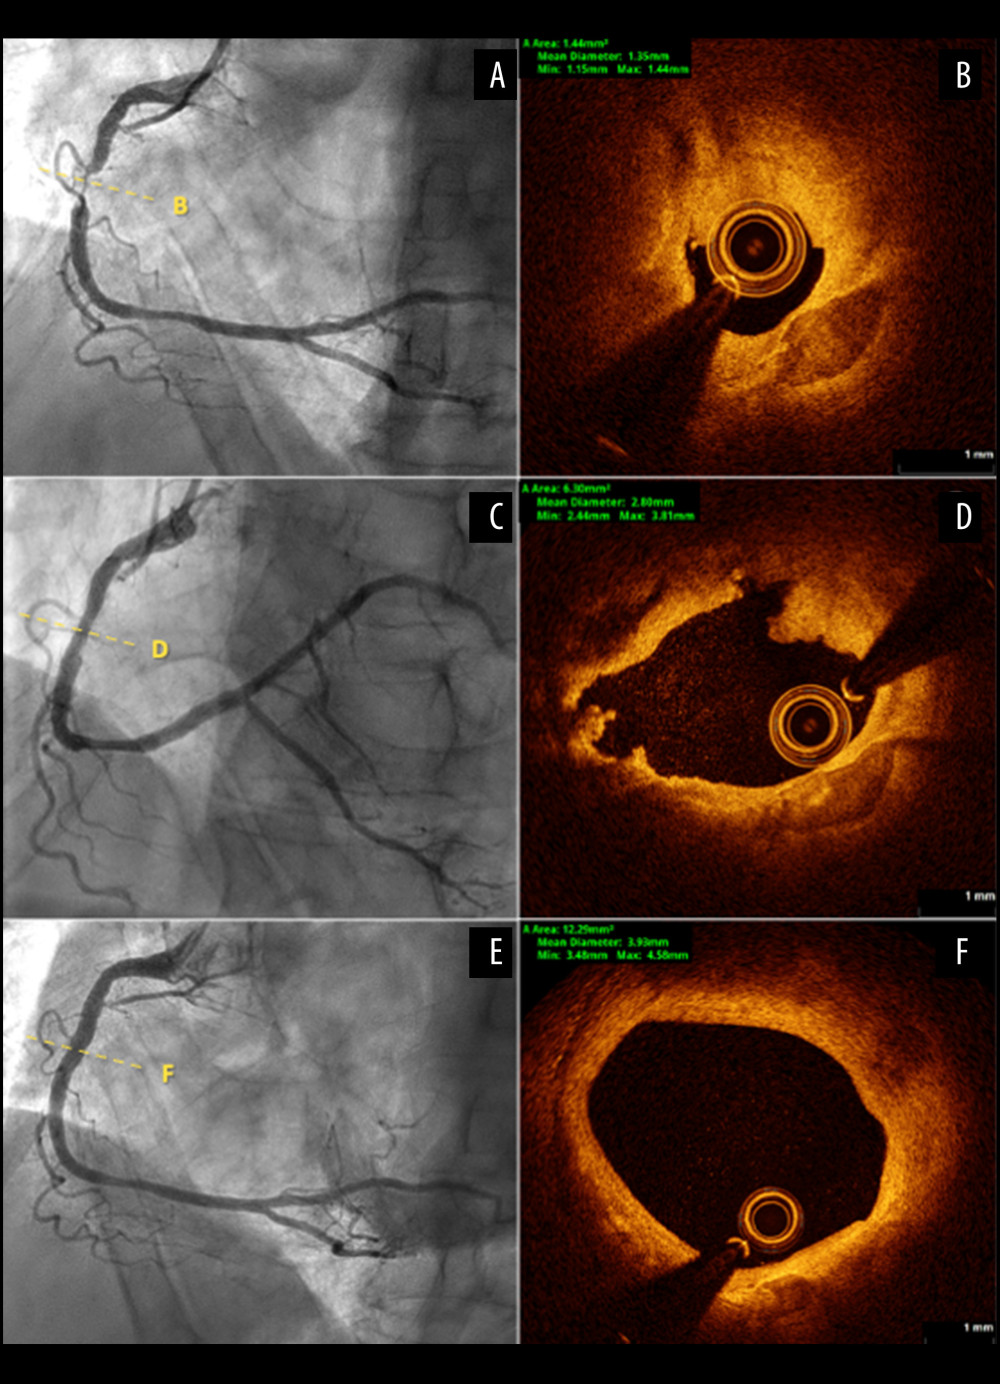 Subtotal stenosis of the RCA; A – Initial angiography with subtotal stenosis of the mid-RCA; B – OCT demonstrated a plaque rupture with presence of thrombus; C, D – Final angiography and OCT showing good luminal gain (6.30 mm2) despite presence of dissections; E – 5 weeks follow-up angiography result, absence of residual dissection and further luminal gain; F – OCT showed rapid resolution of all dissections and further increase of MLA.